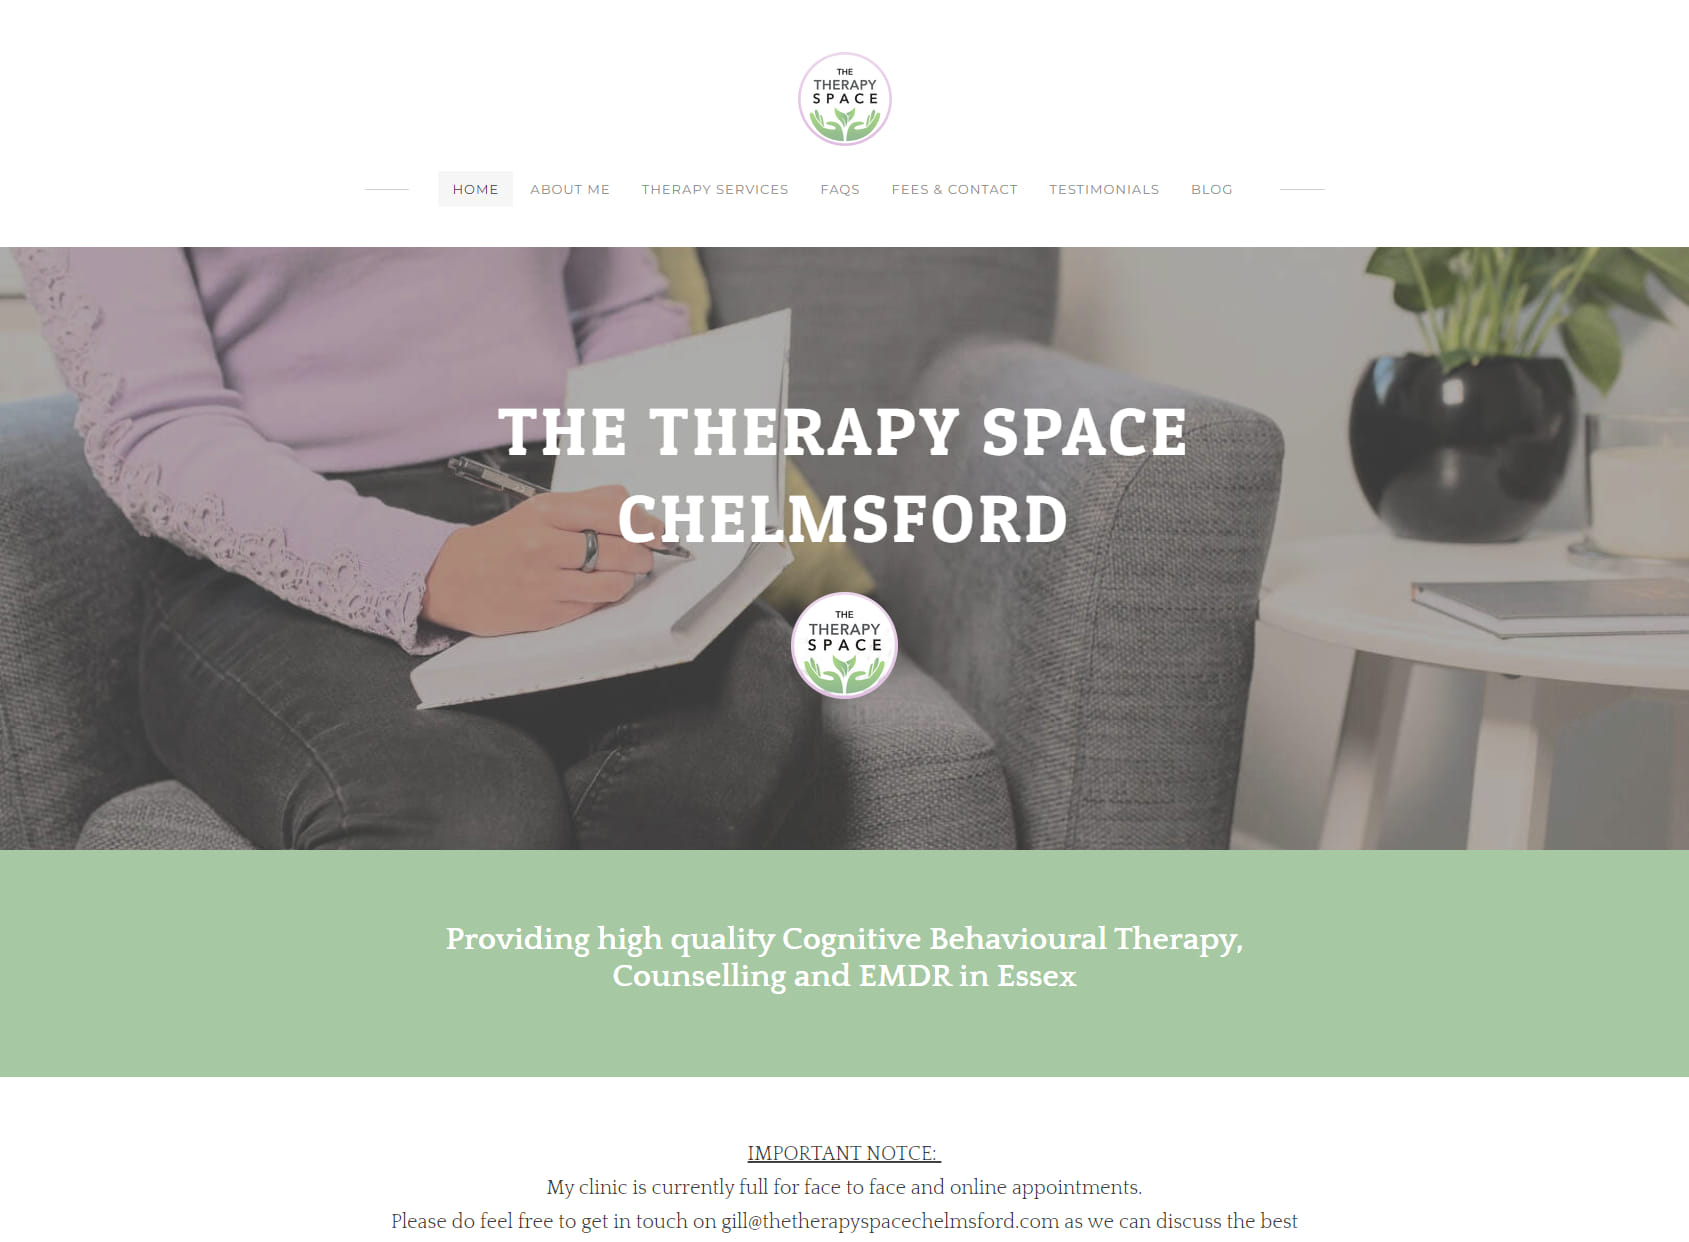 The Therapy Space Chelmsford